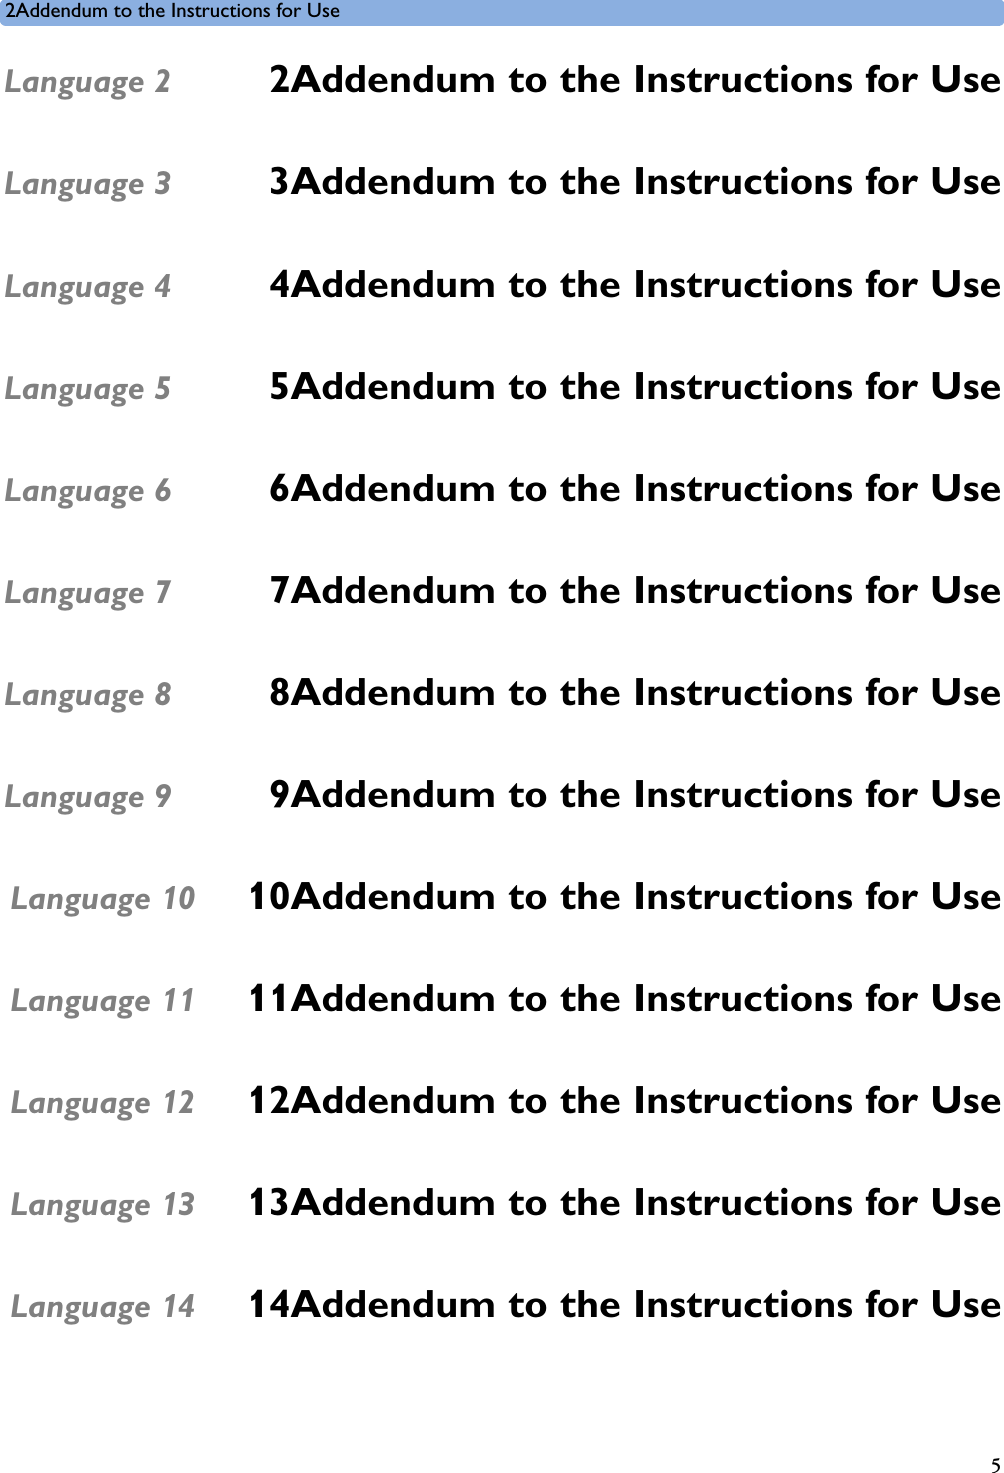 2Addendum to the Instructions for Use52Language 2  2Addendum to the Instructions for Use3Language 3  3Addendum to the Instructions for Use4Language 4  4Addendum to the Instructions for Use5Language 5  5Addendum to the Instructions for Use6Language 6  6Addendum to the Instructions for Use7Language 7  7Addendum to the Instructions for Use8Language 8  8Addendum to the Instructions for Use9Language 9  9Addendum to the Instructions for Use10Language 10  10Addendum to the Instructions for Use11Language 11  11Addendum to the Instructions for Use12Language 12  12Addendum to the Instructions for Use13Language 13  13Addendum to the Instructions for Use14Language 14  14Addendum to the Instructions for Use